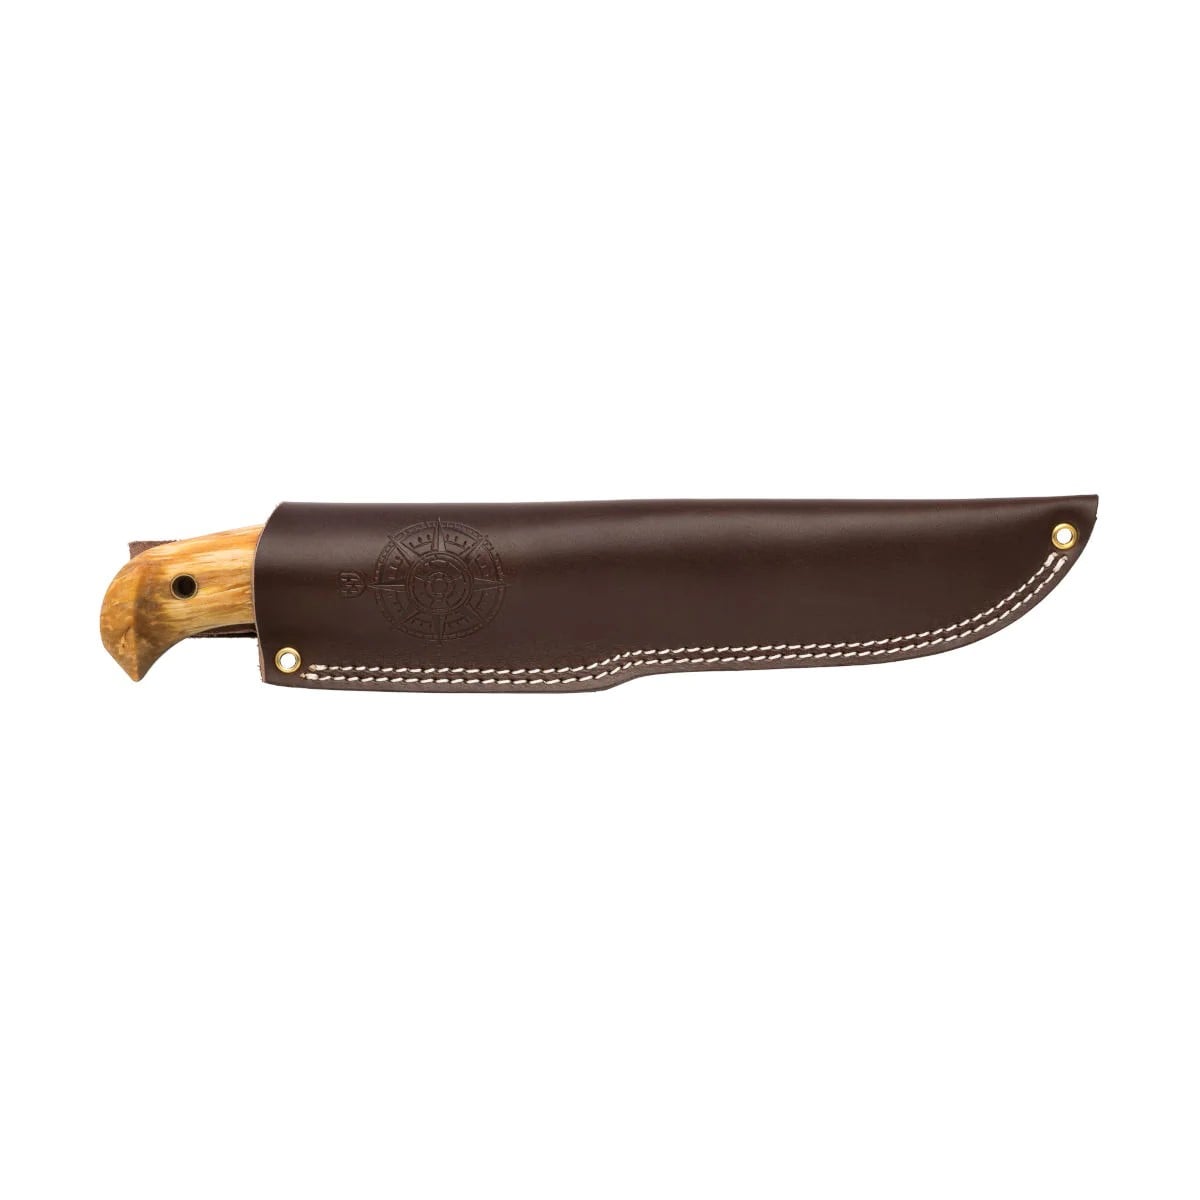 Helle 670 Nord